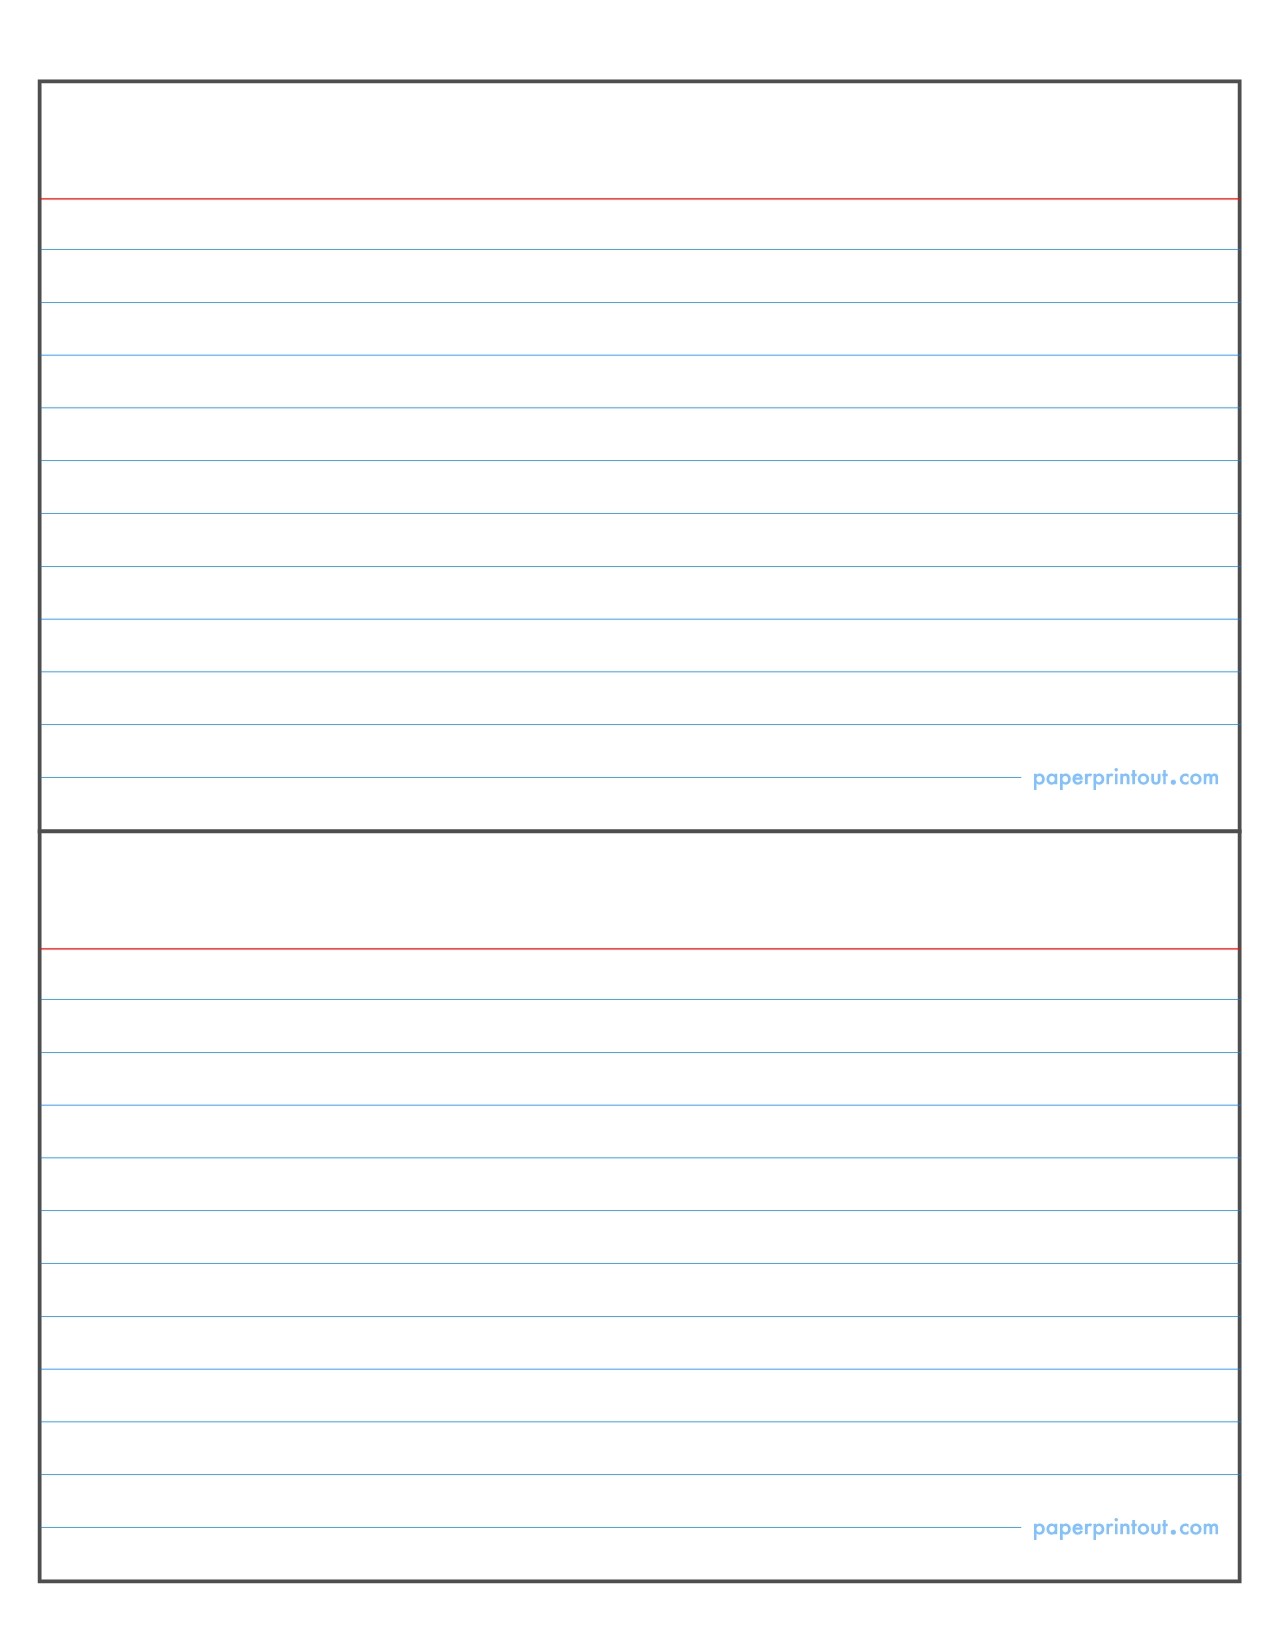 avery index card template